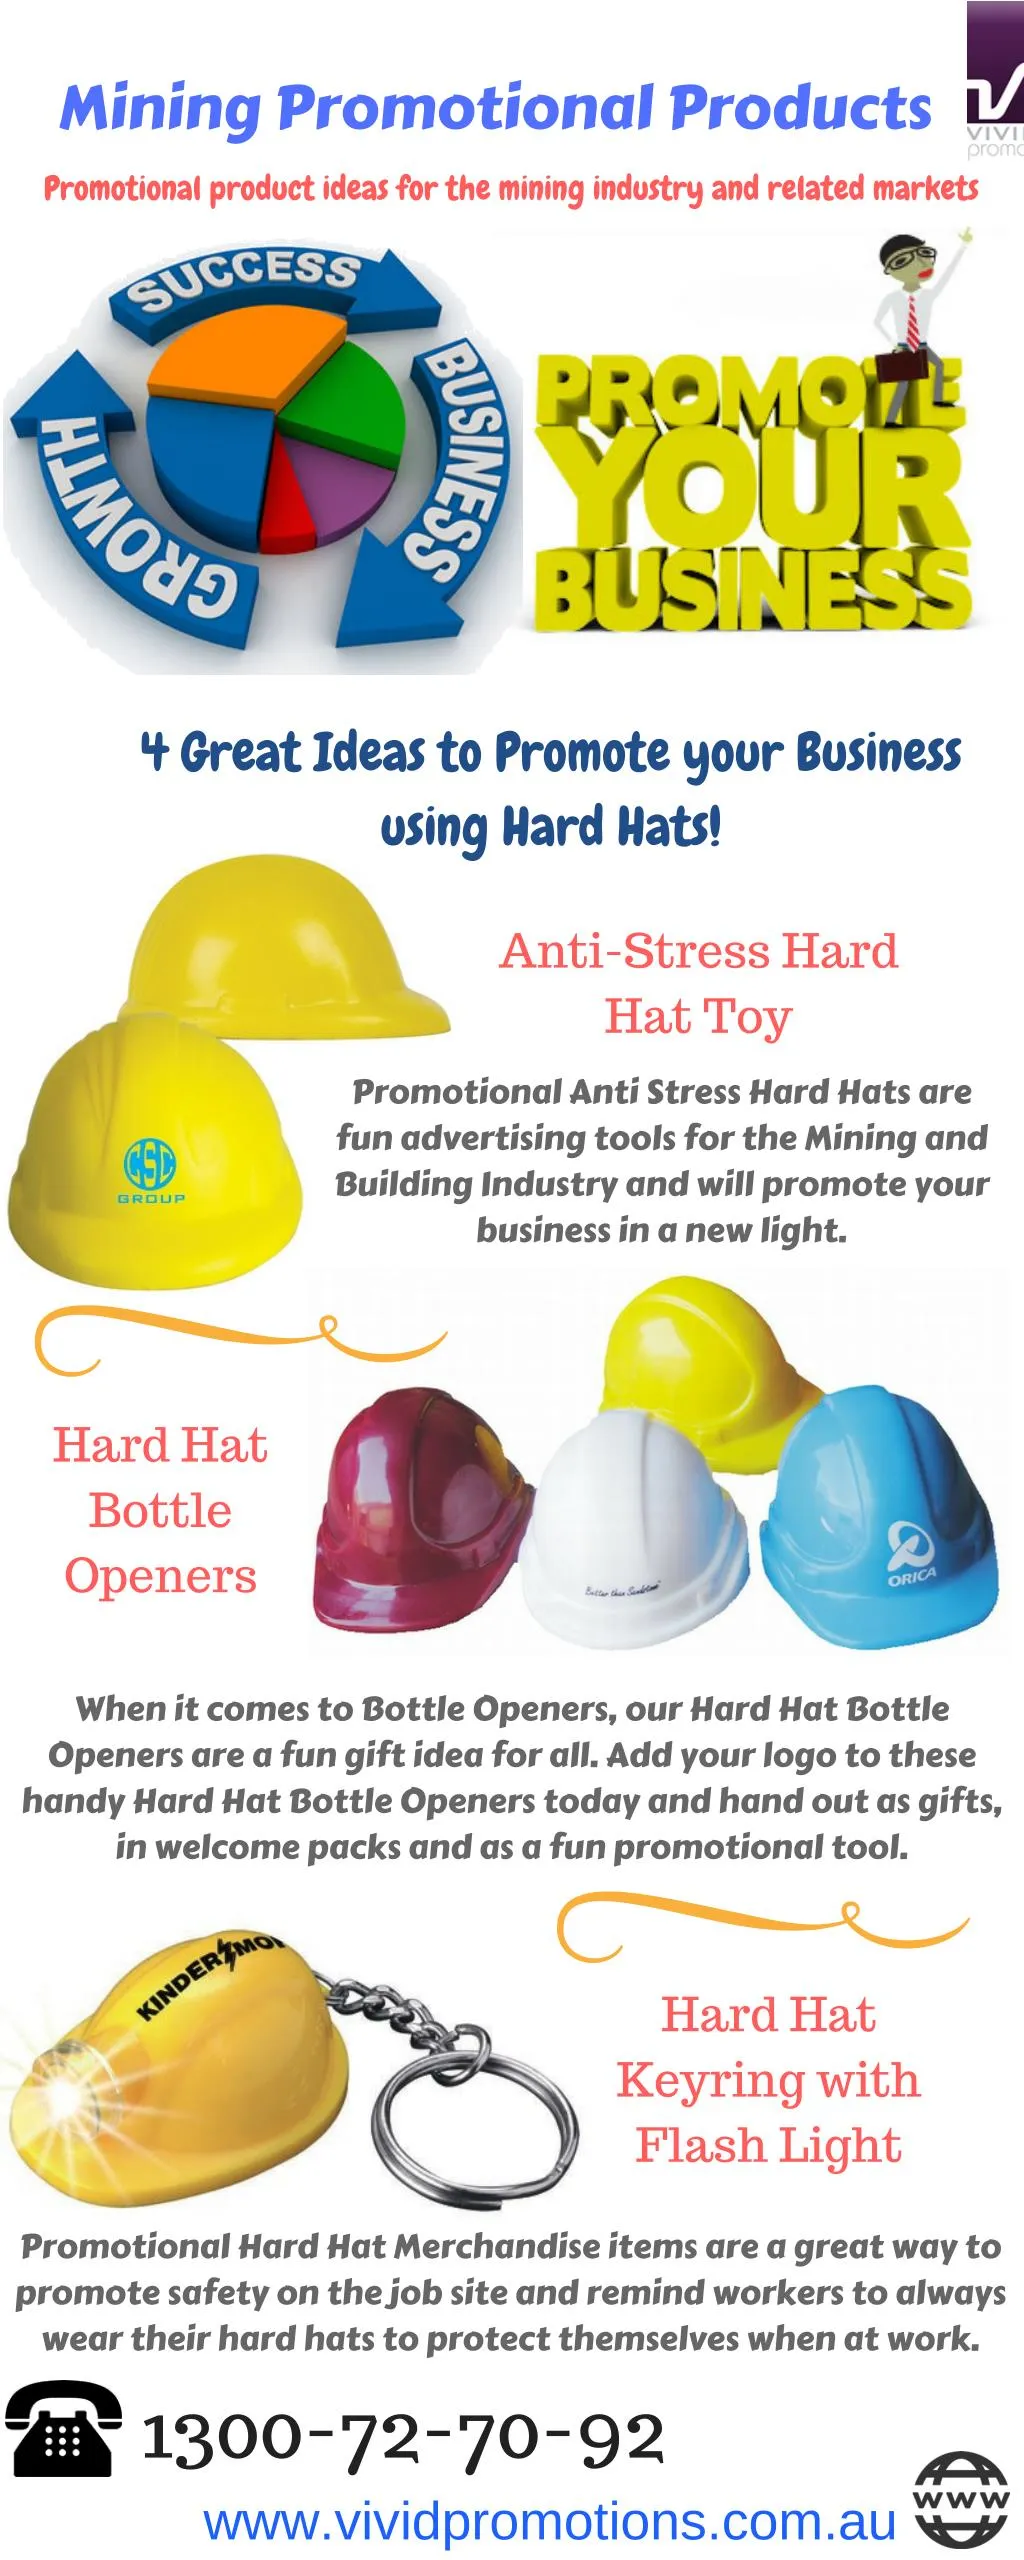 mining promotional products promotional product